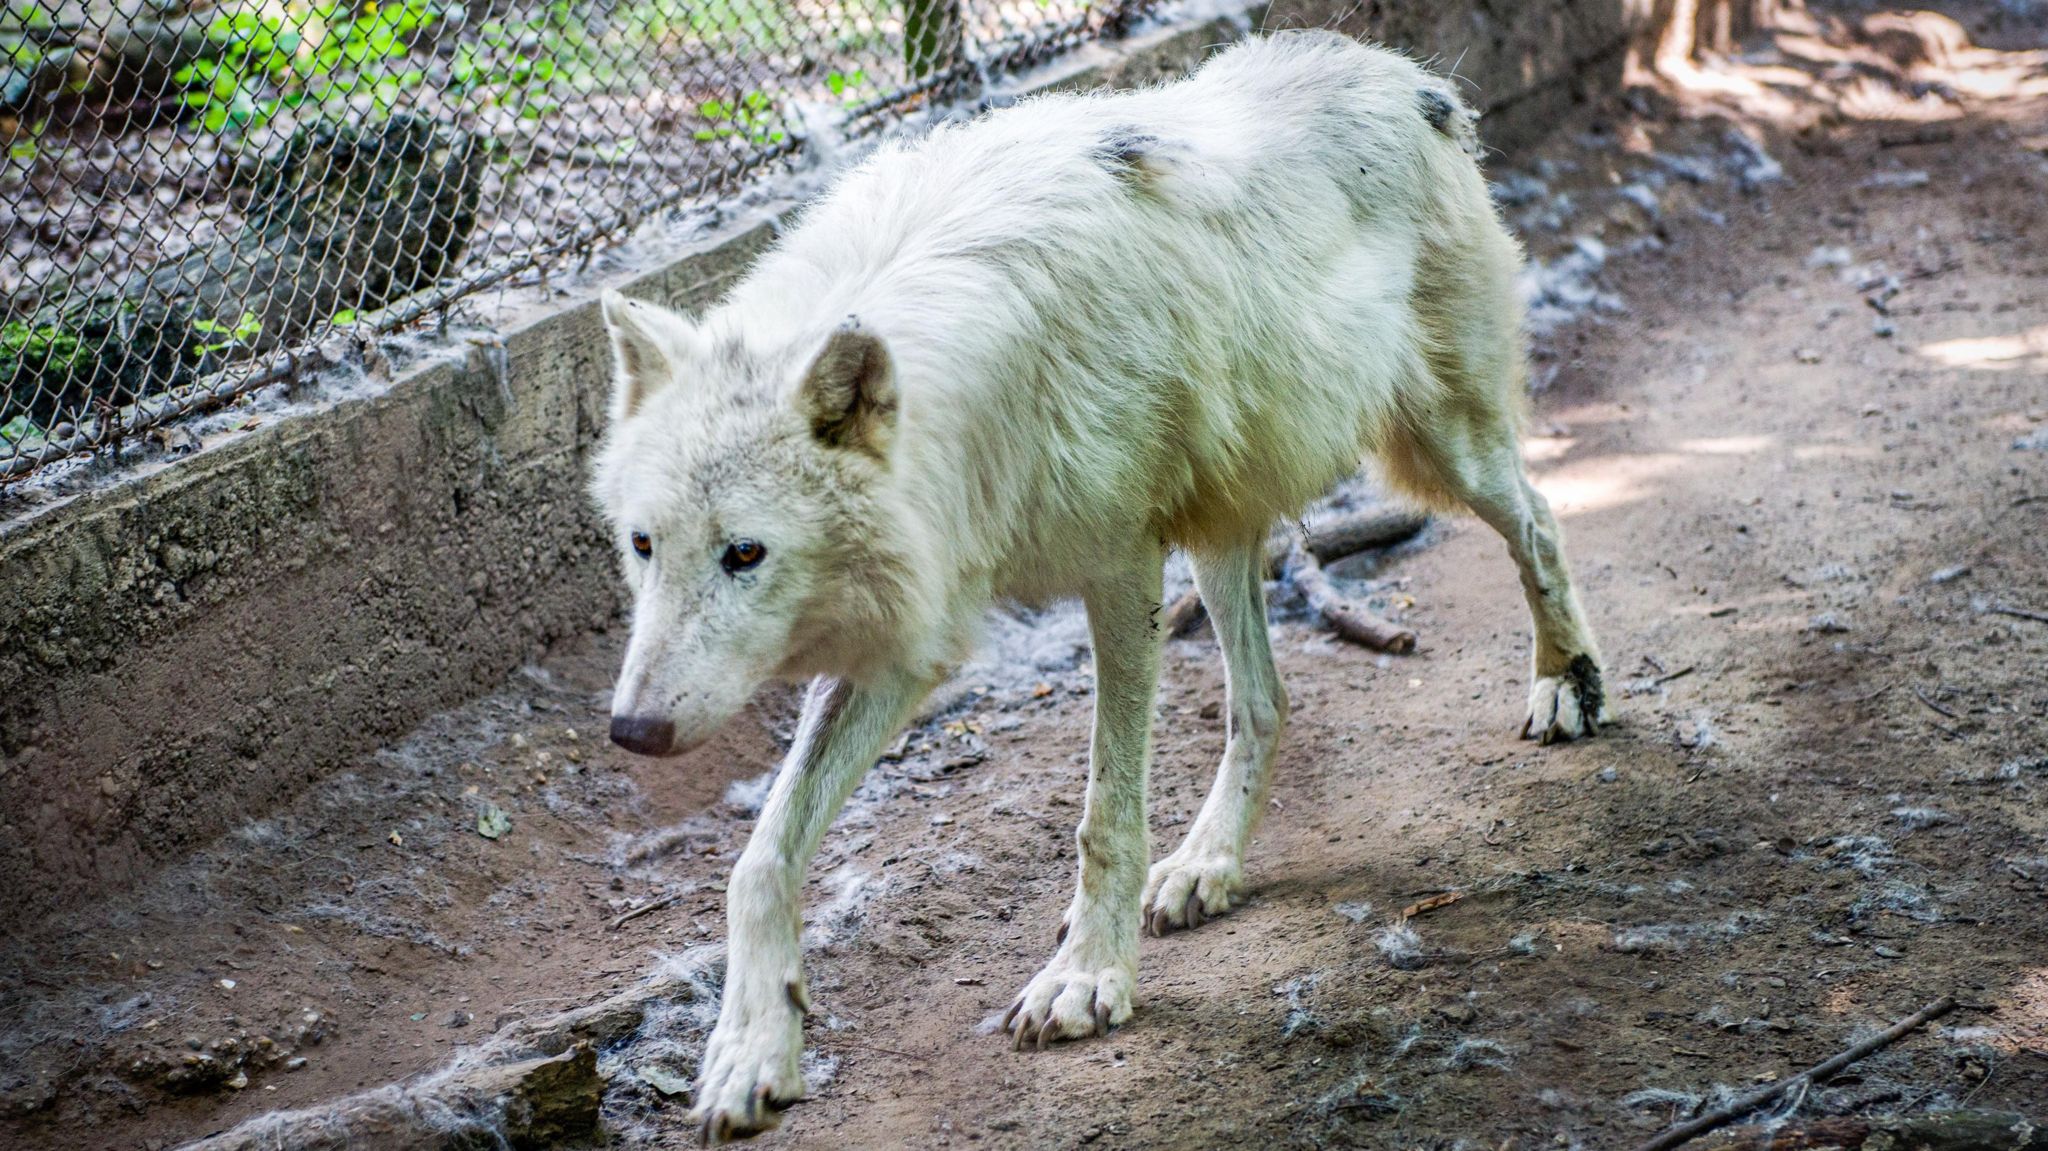 Artic wolf in a Hungarian zoo 